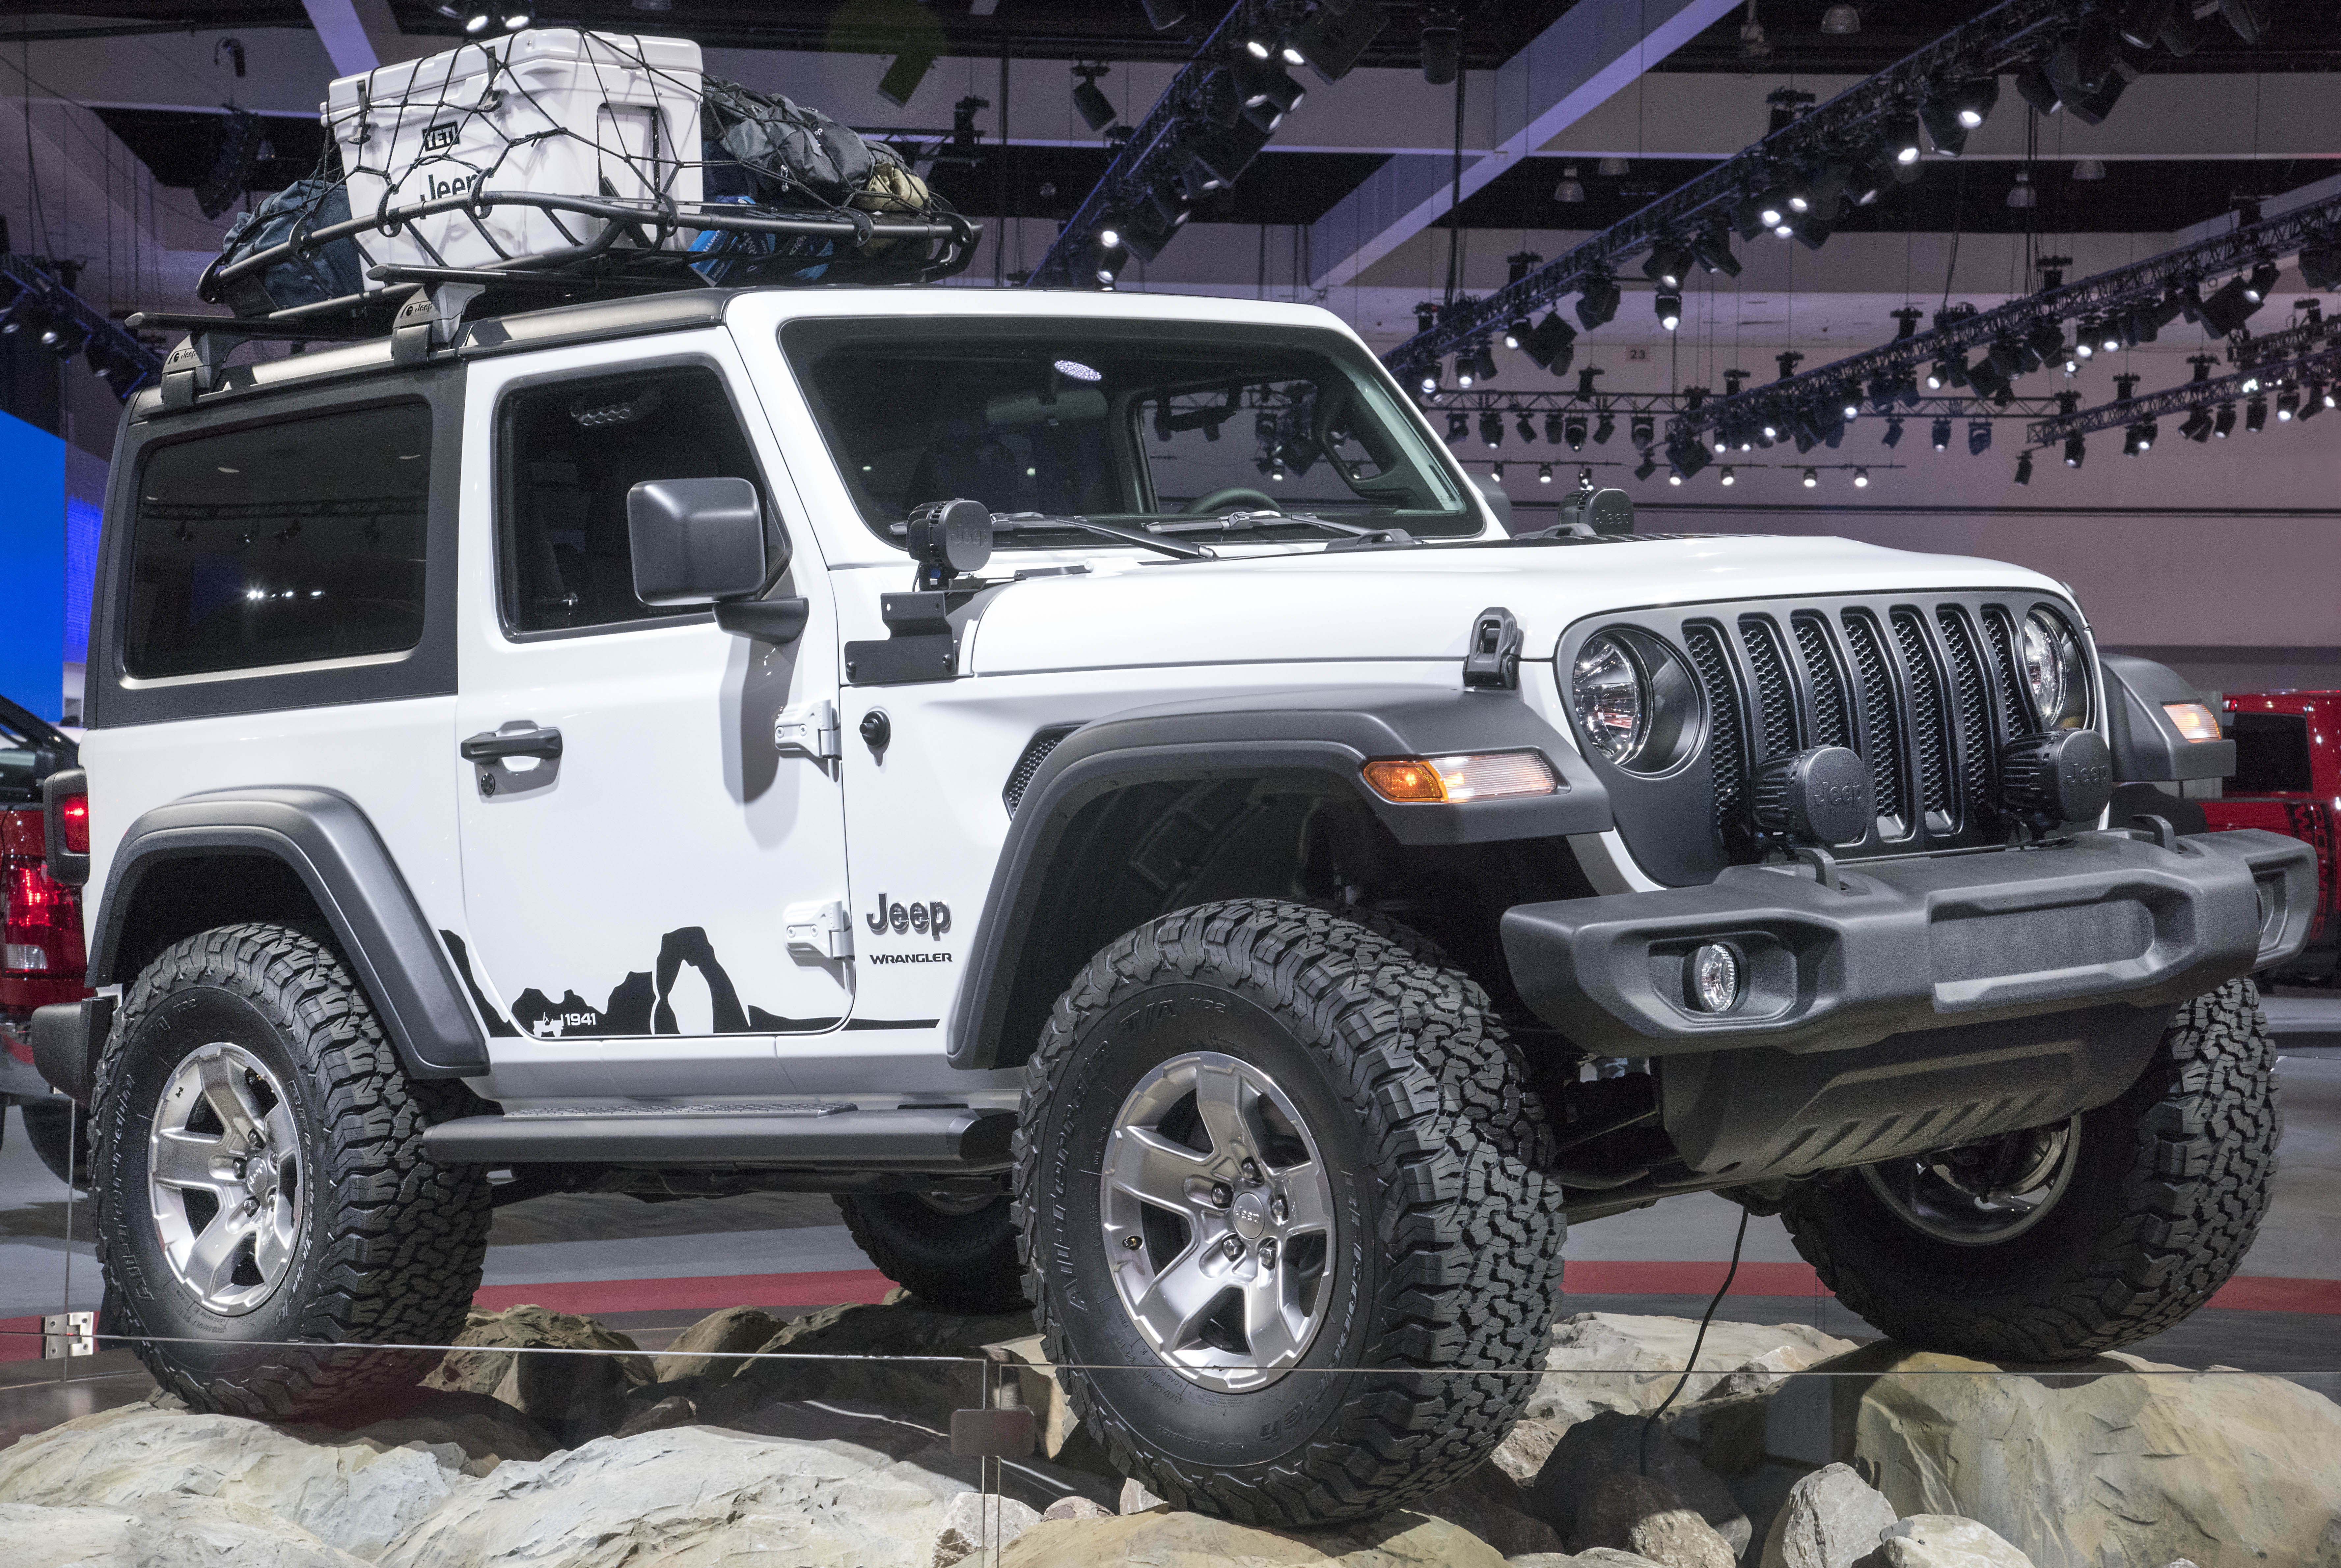 All-new 2018 Jeep® Wrangler Makes Its Way to the 2018 Consumer Electronics Show in Las Vegas